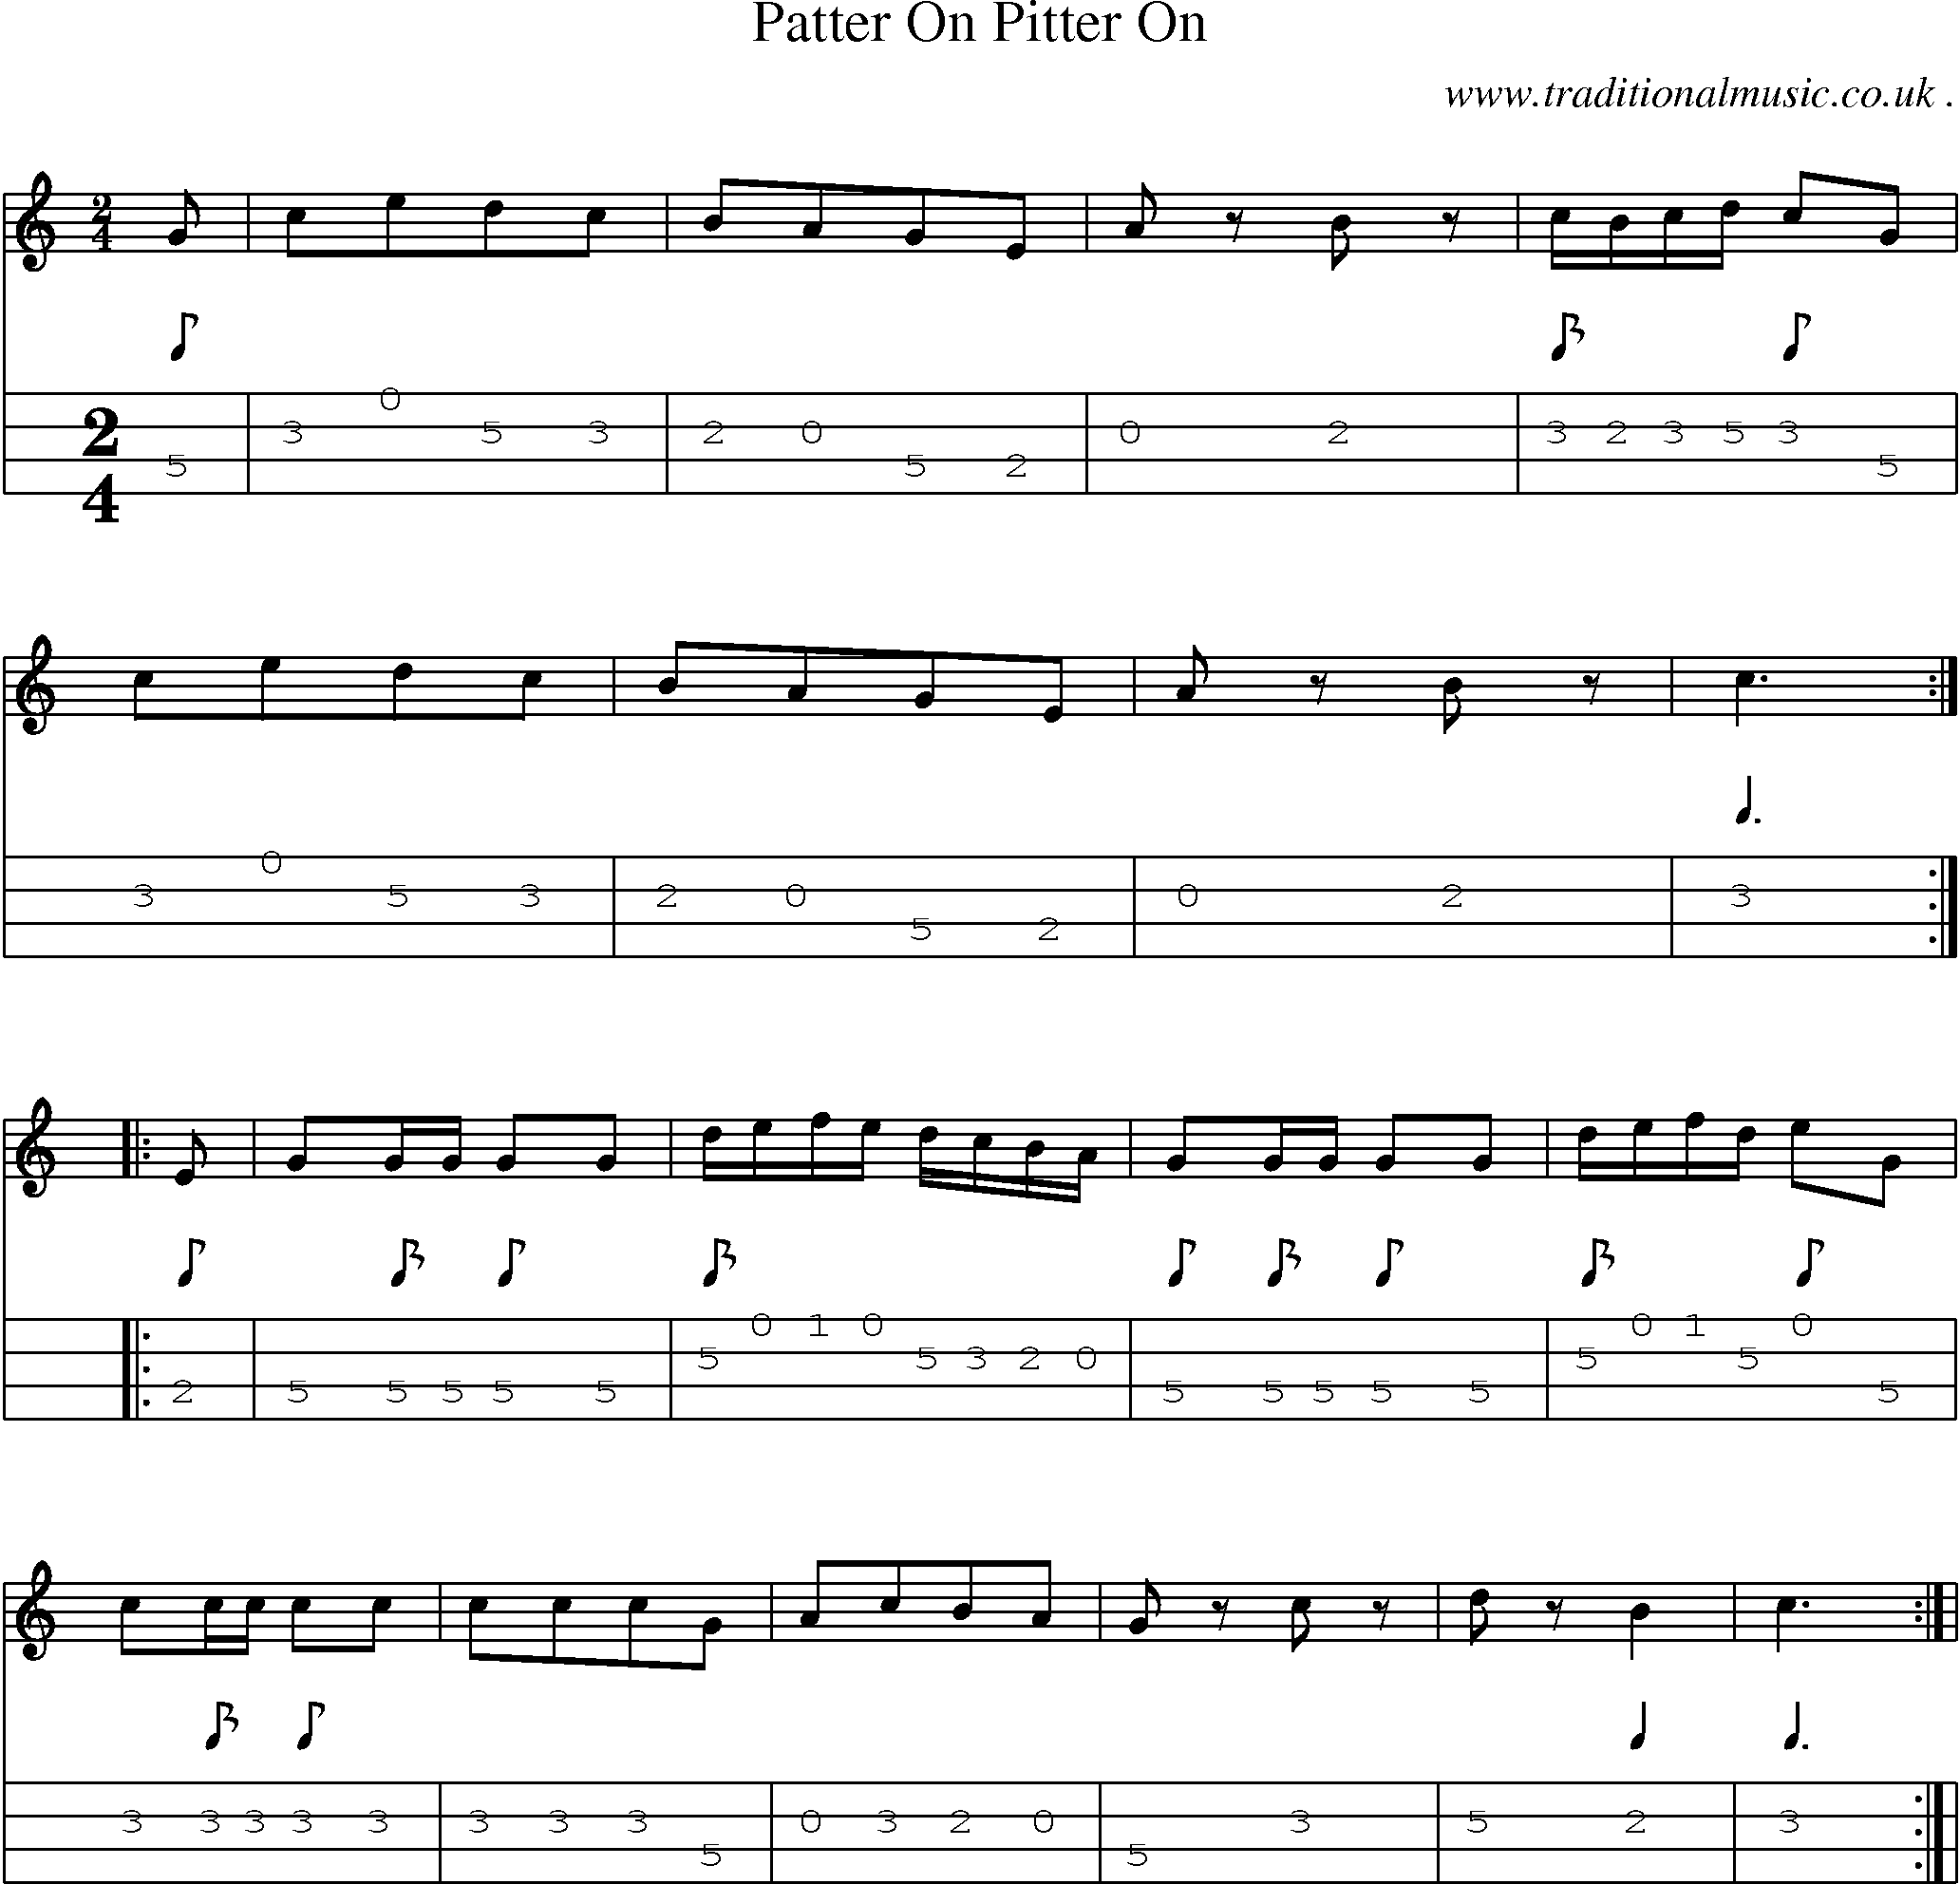 Sheet-Music and Mandolin Tabs for Patter On Pitter On